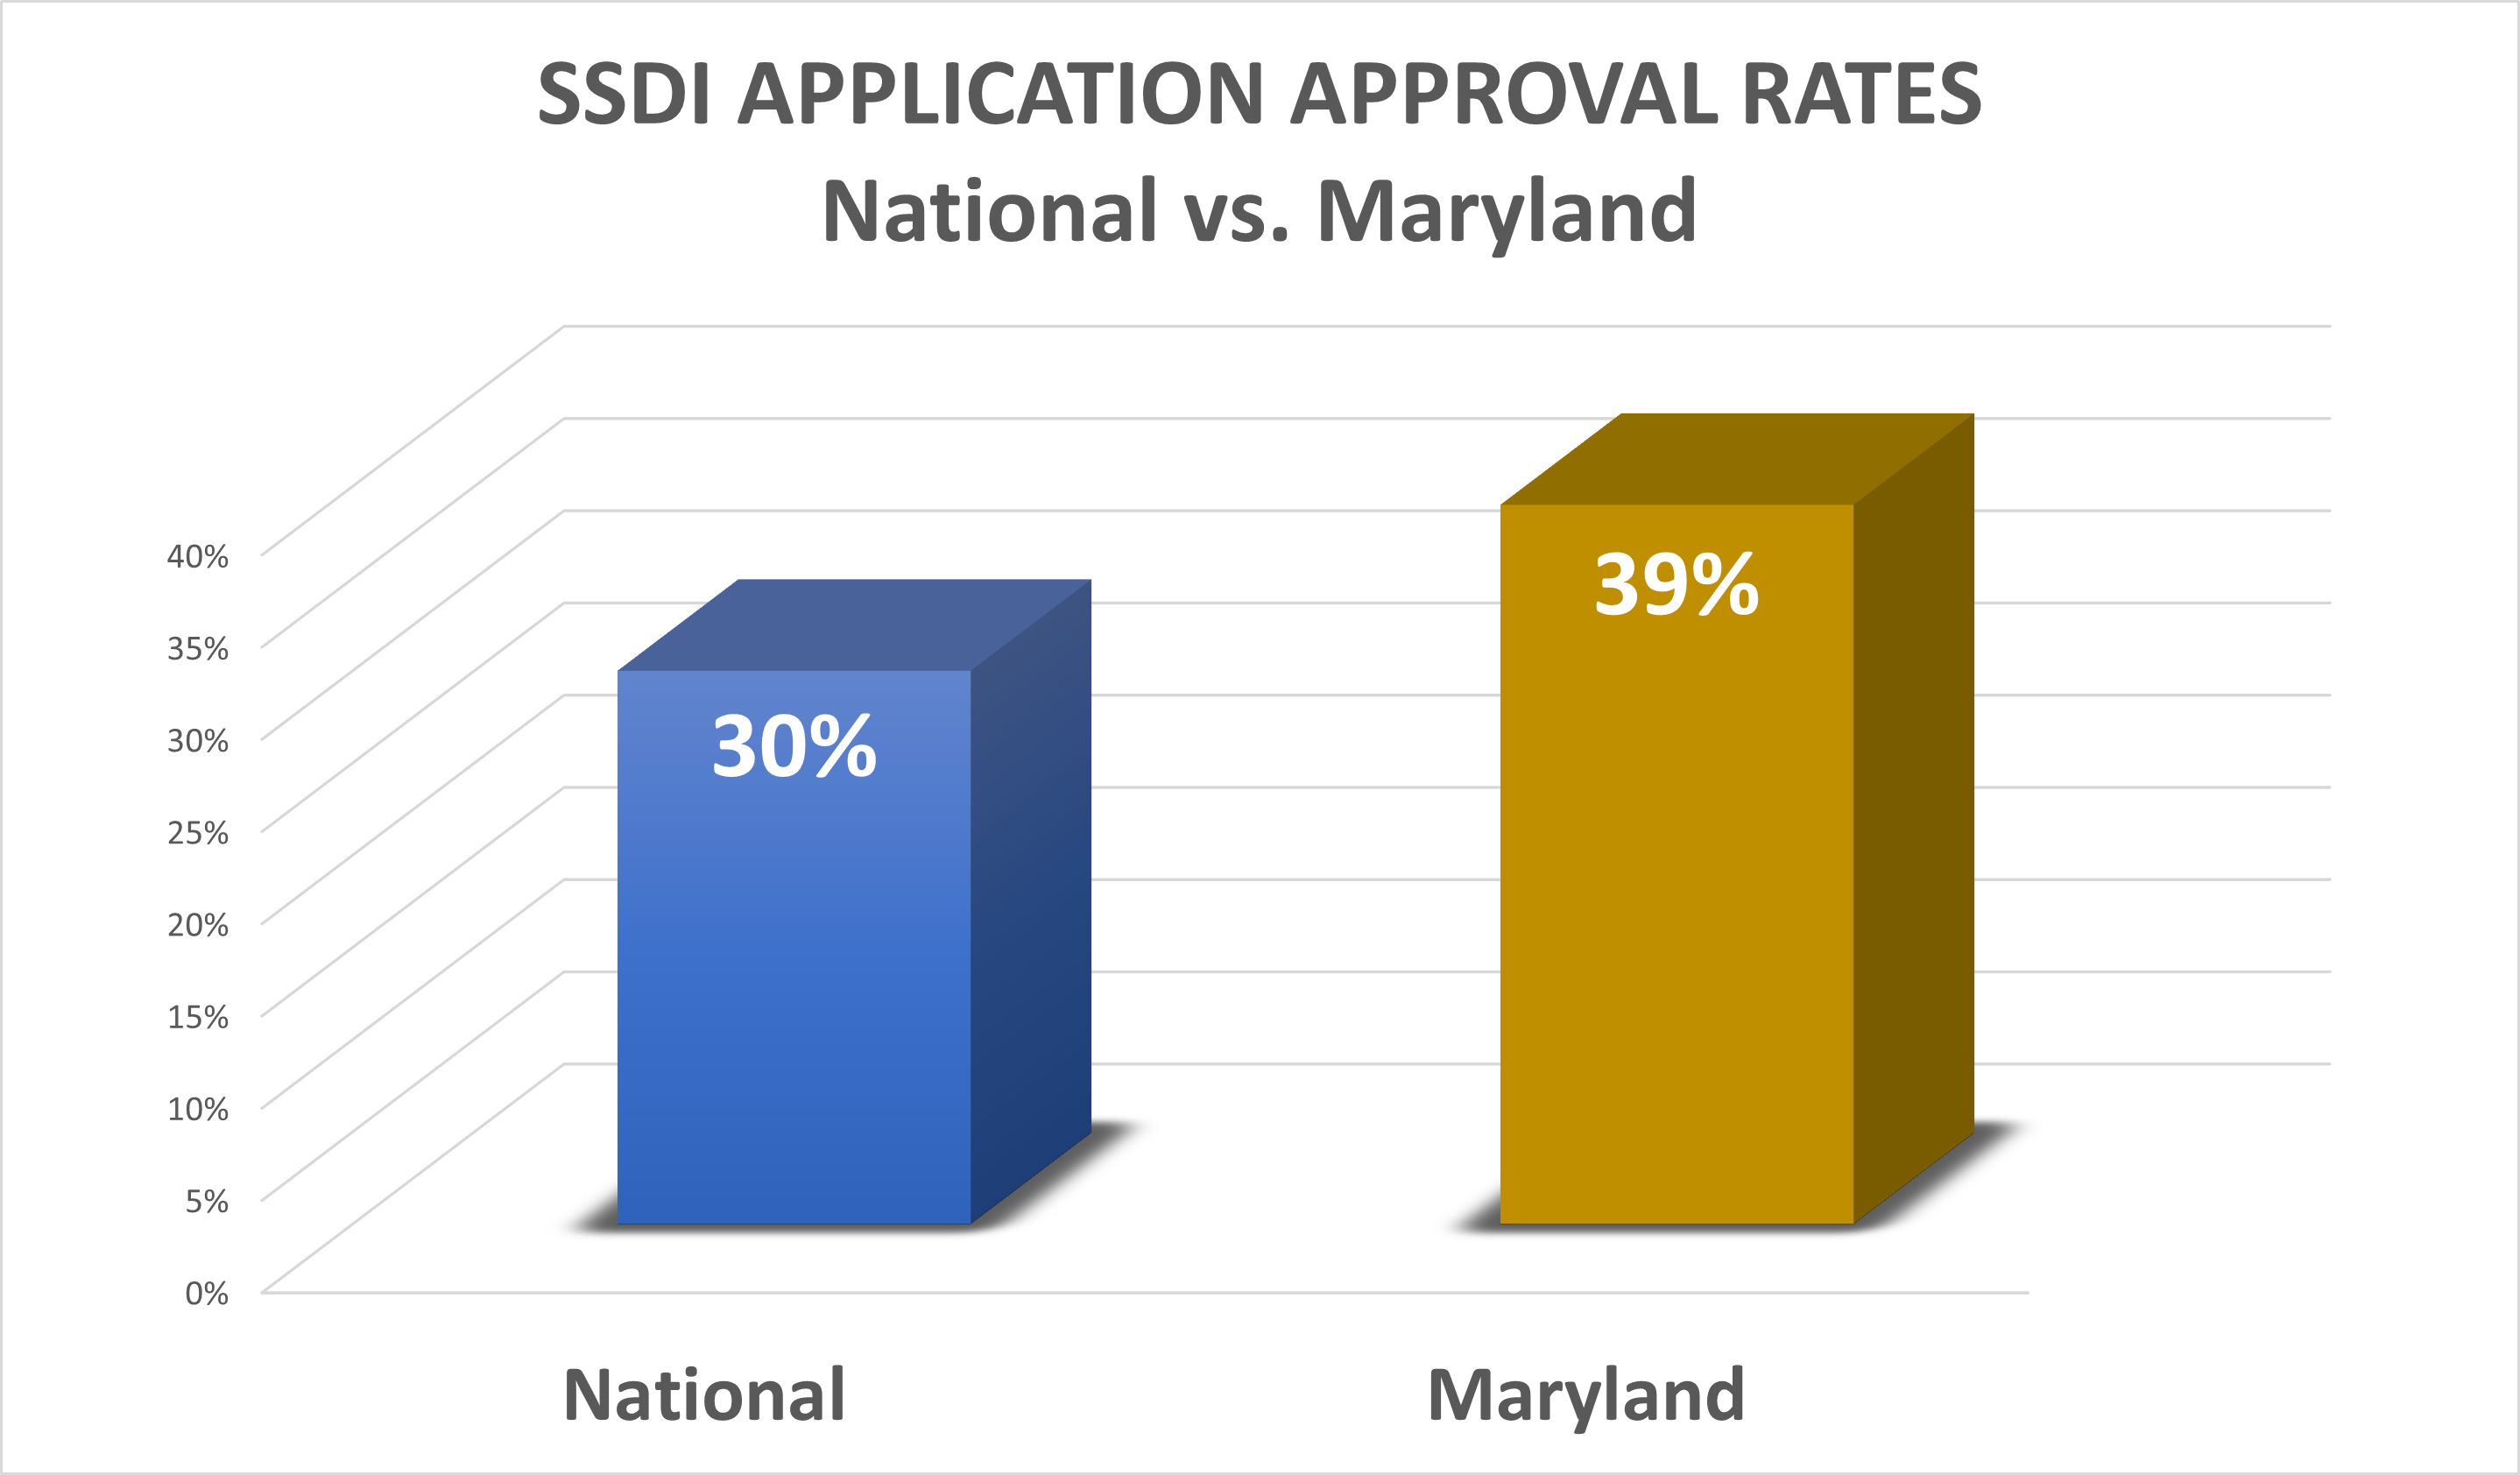 SSDI approval rates